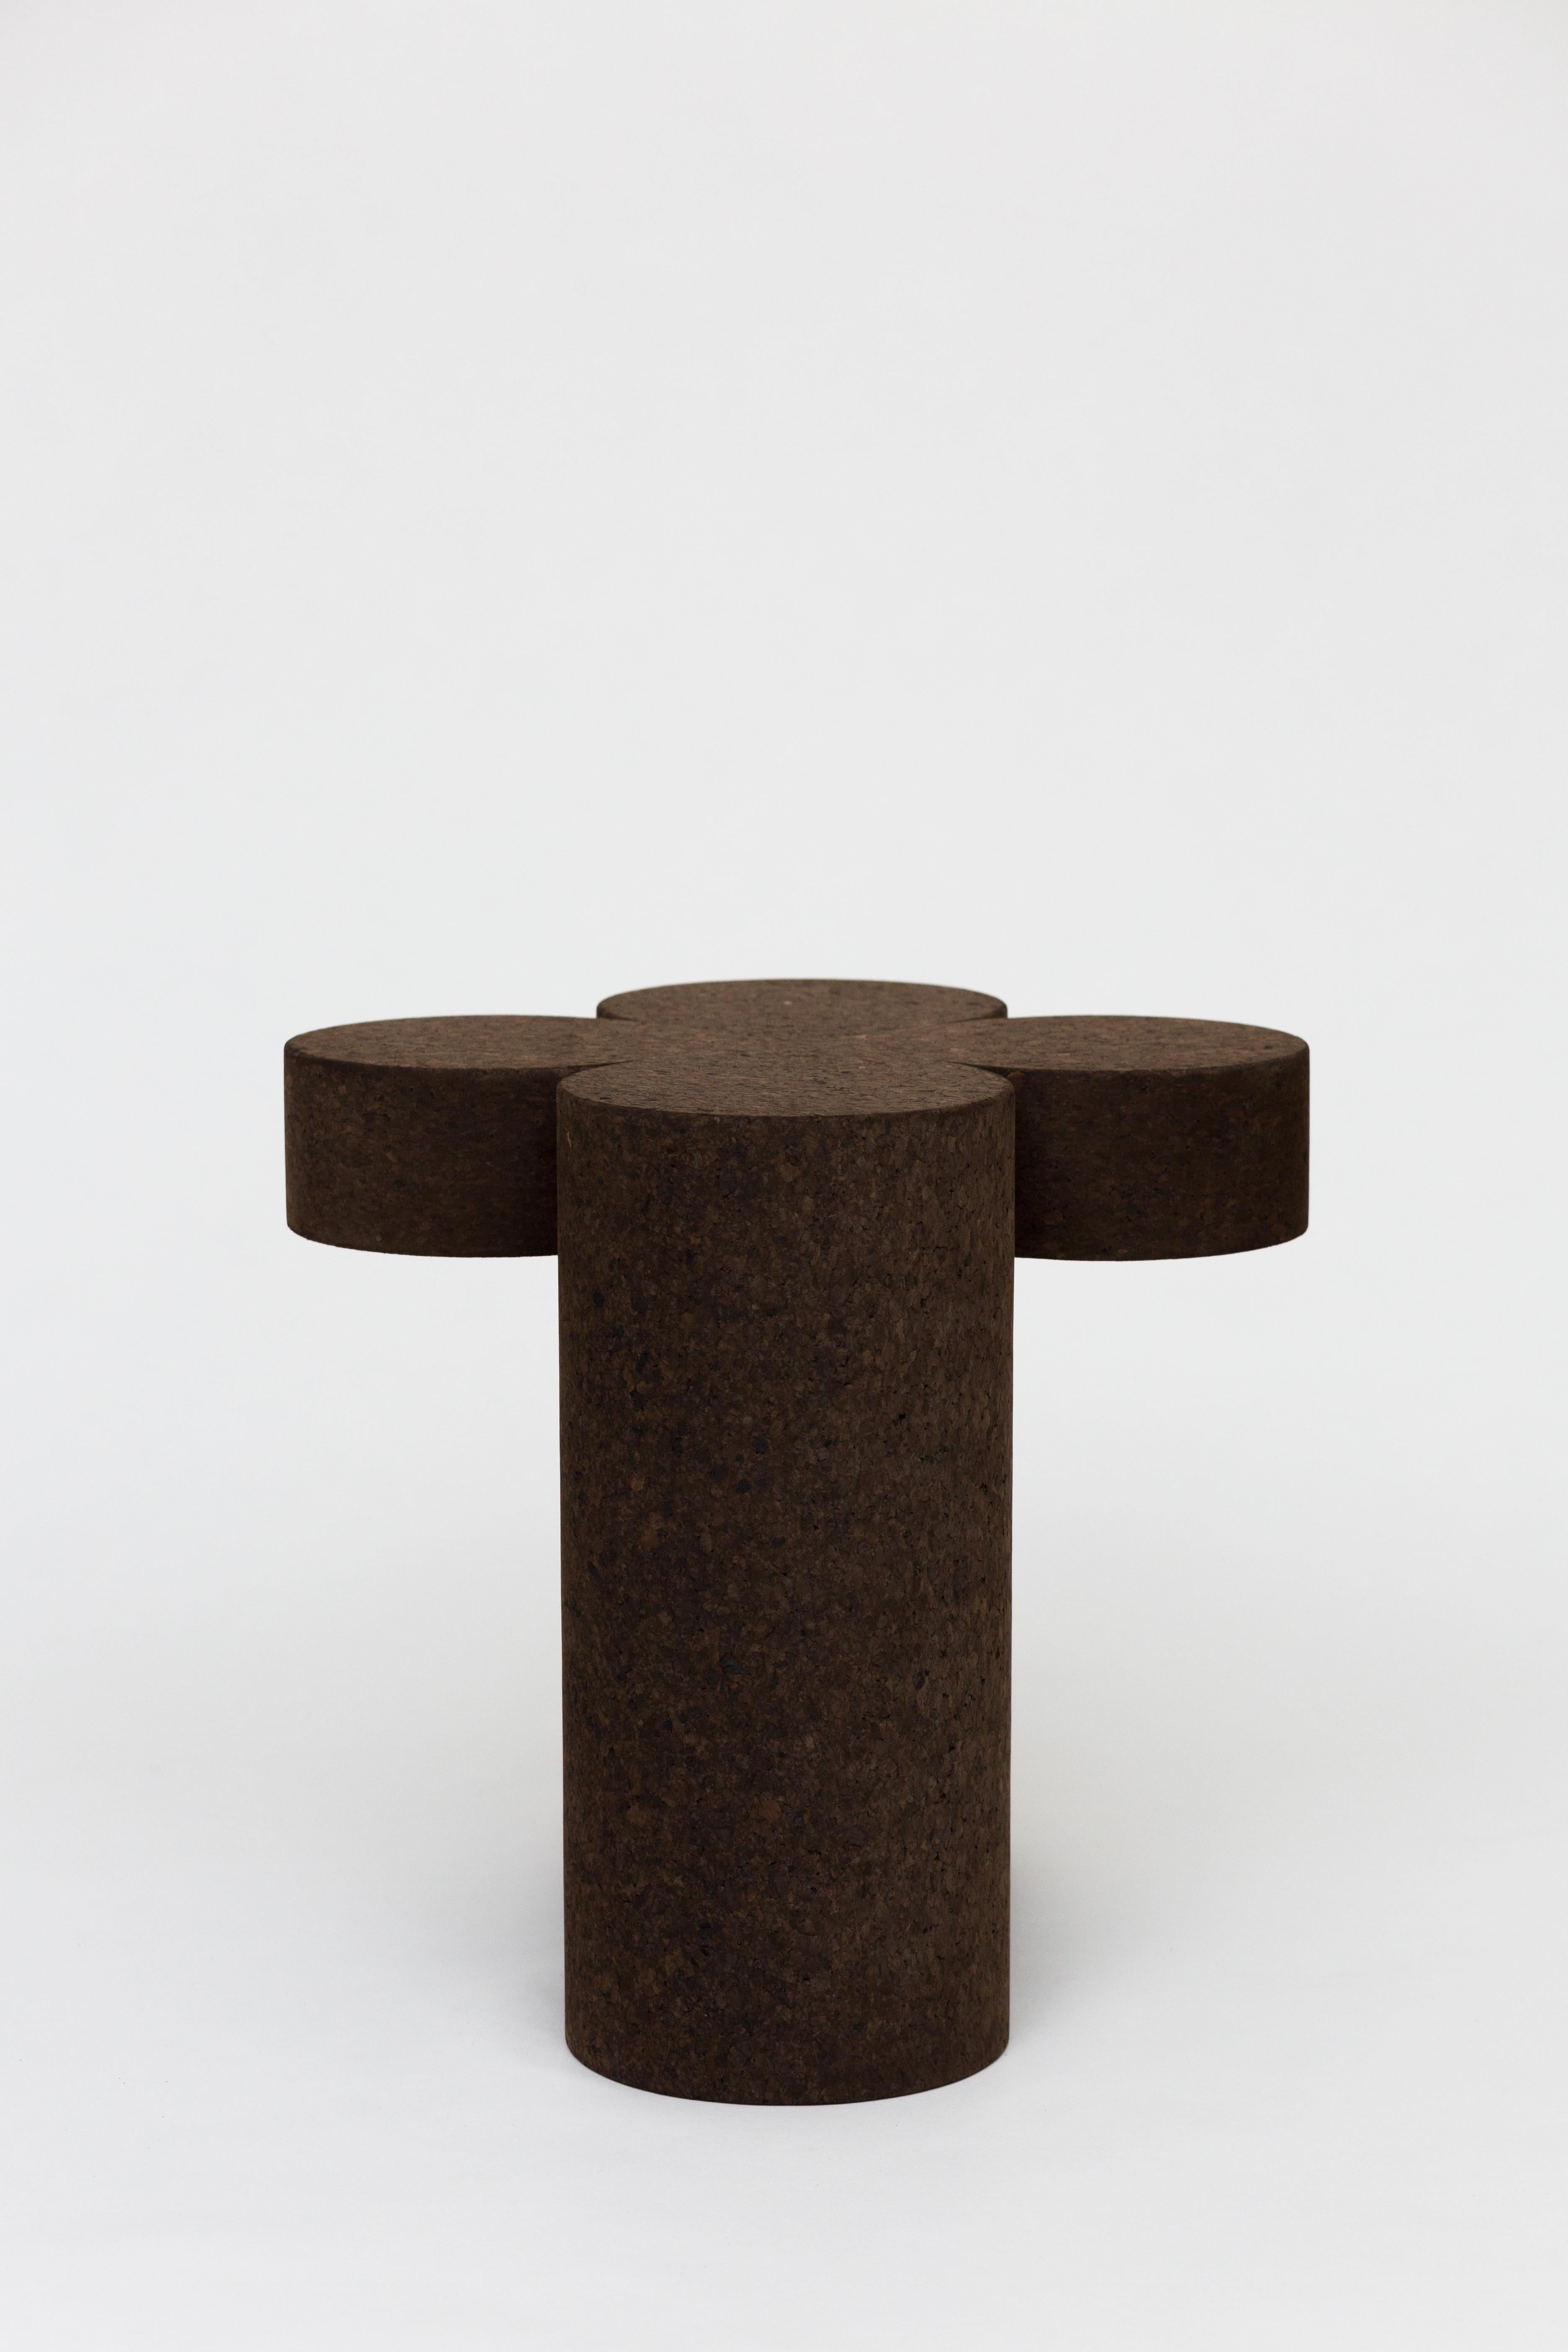 Clover Solid Cork Contemporary Sculptural Carved Side Drinks Table Dark Brown  In New Condition For Sale In Bainbridge Island, WA